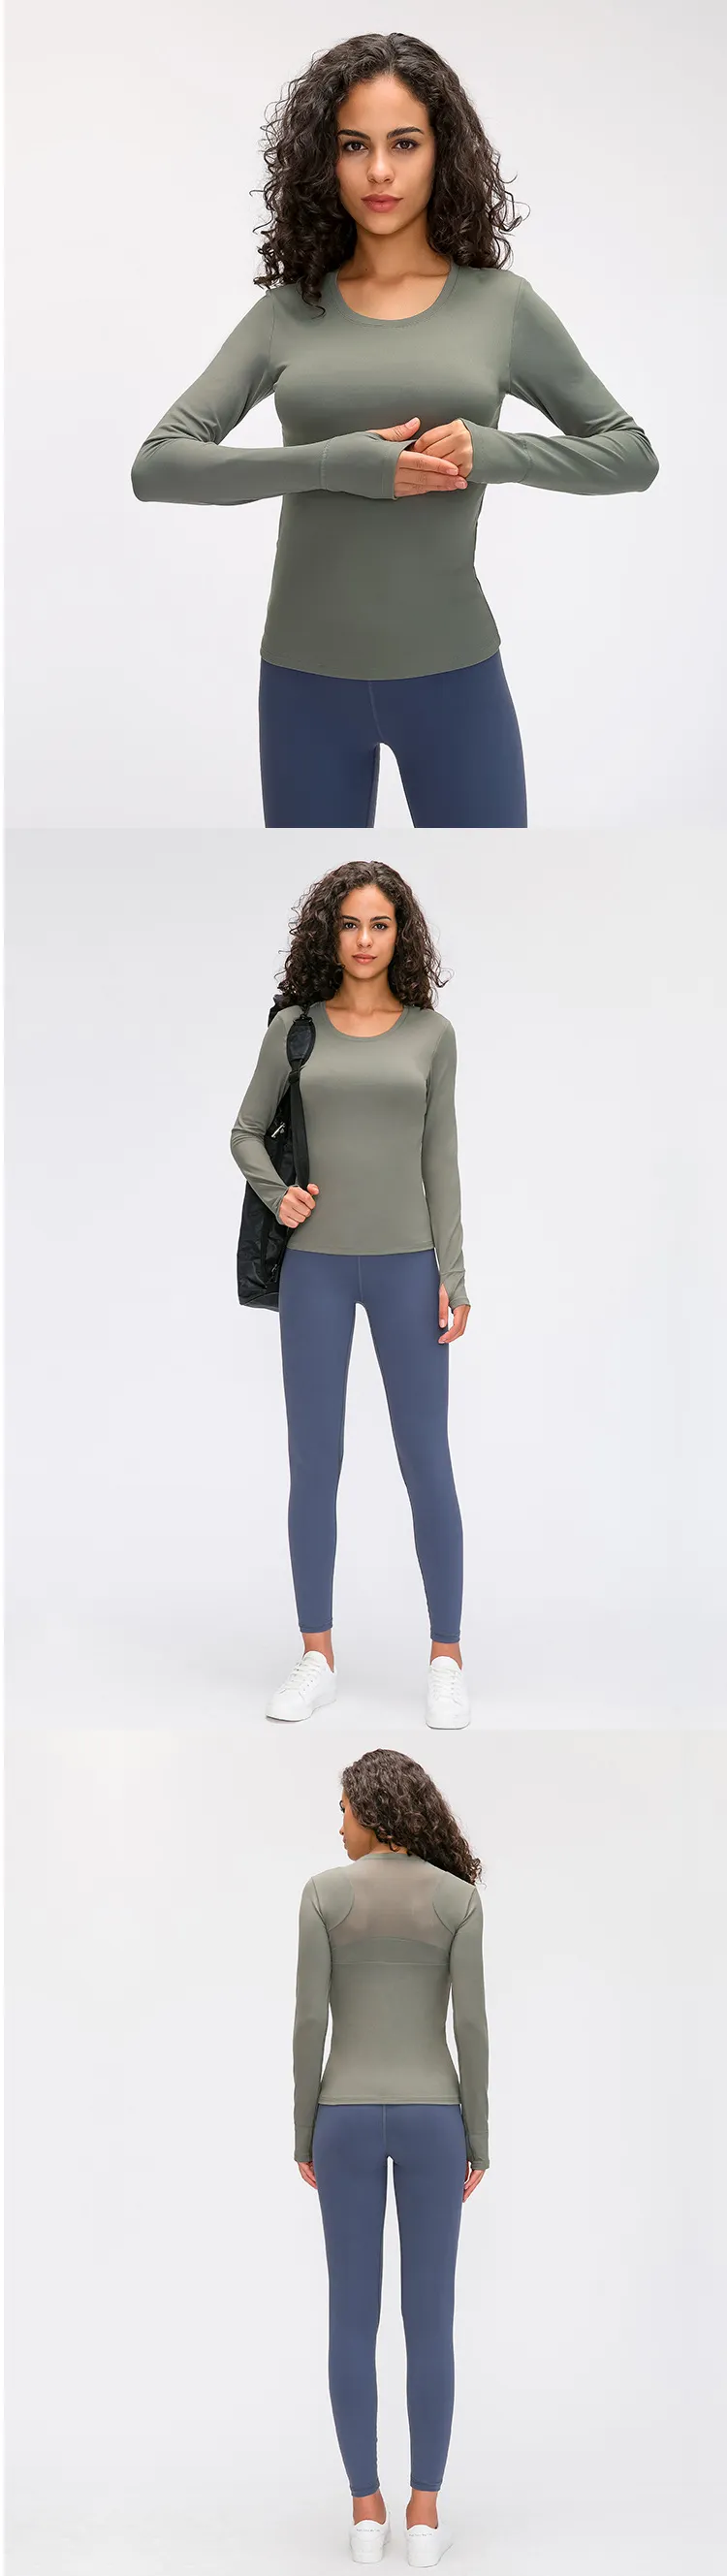 Lululemon Style Women'S Yoga Long Sleeve T-Shirt With Breast Pad Mesh Quick Drying Breathable Elastic Slim Fitness Top